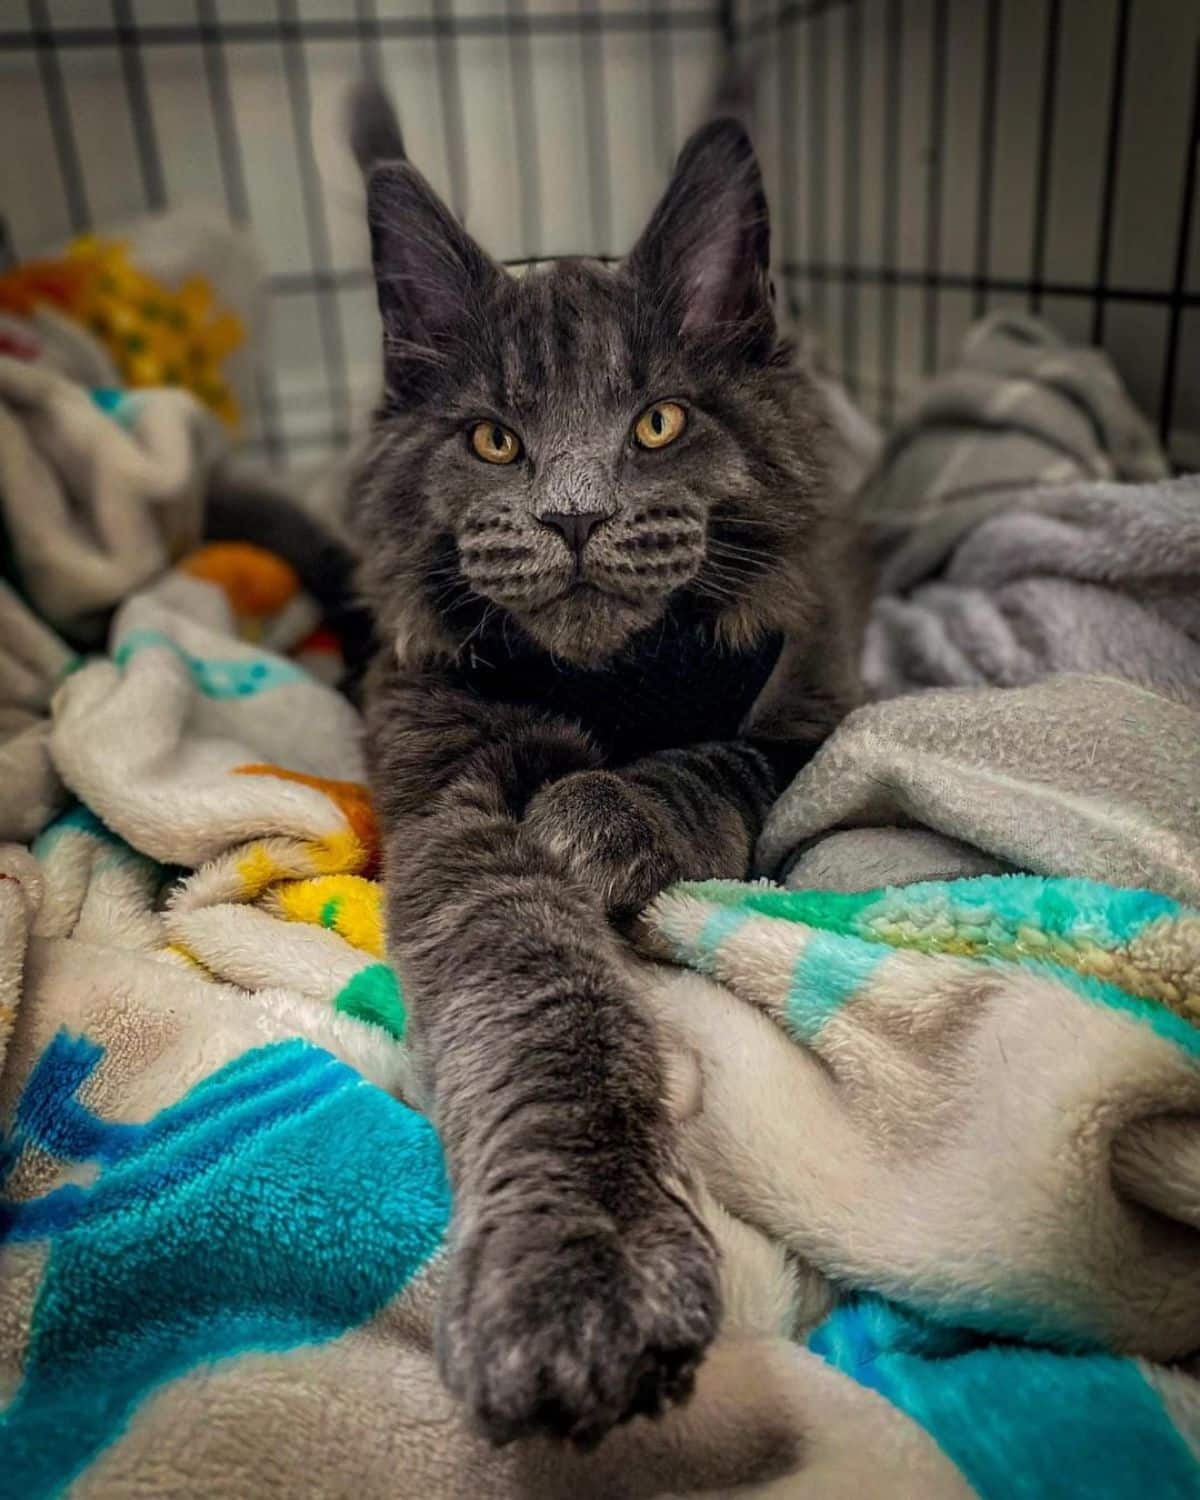 An adorable gray maine coon lying on a blanket.